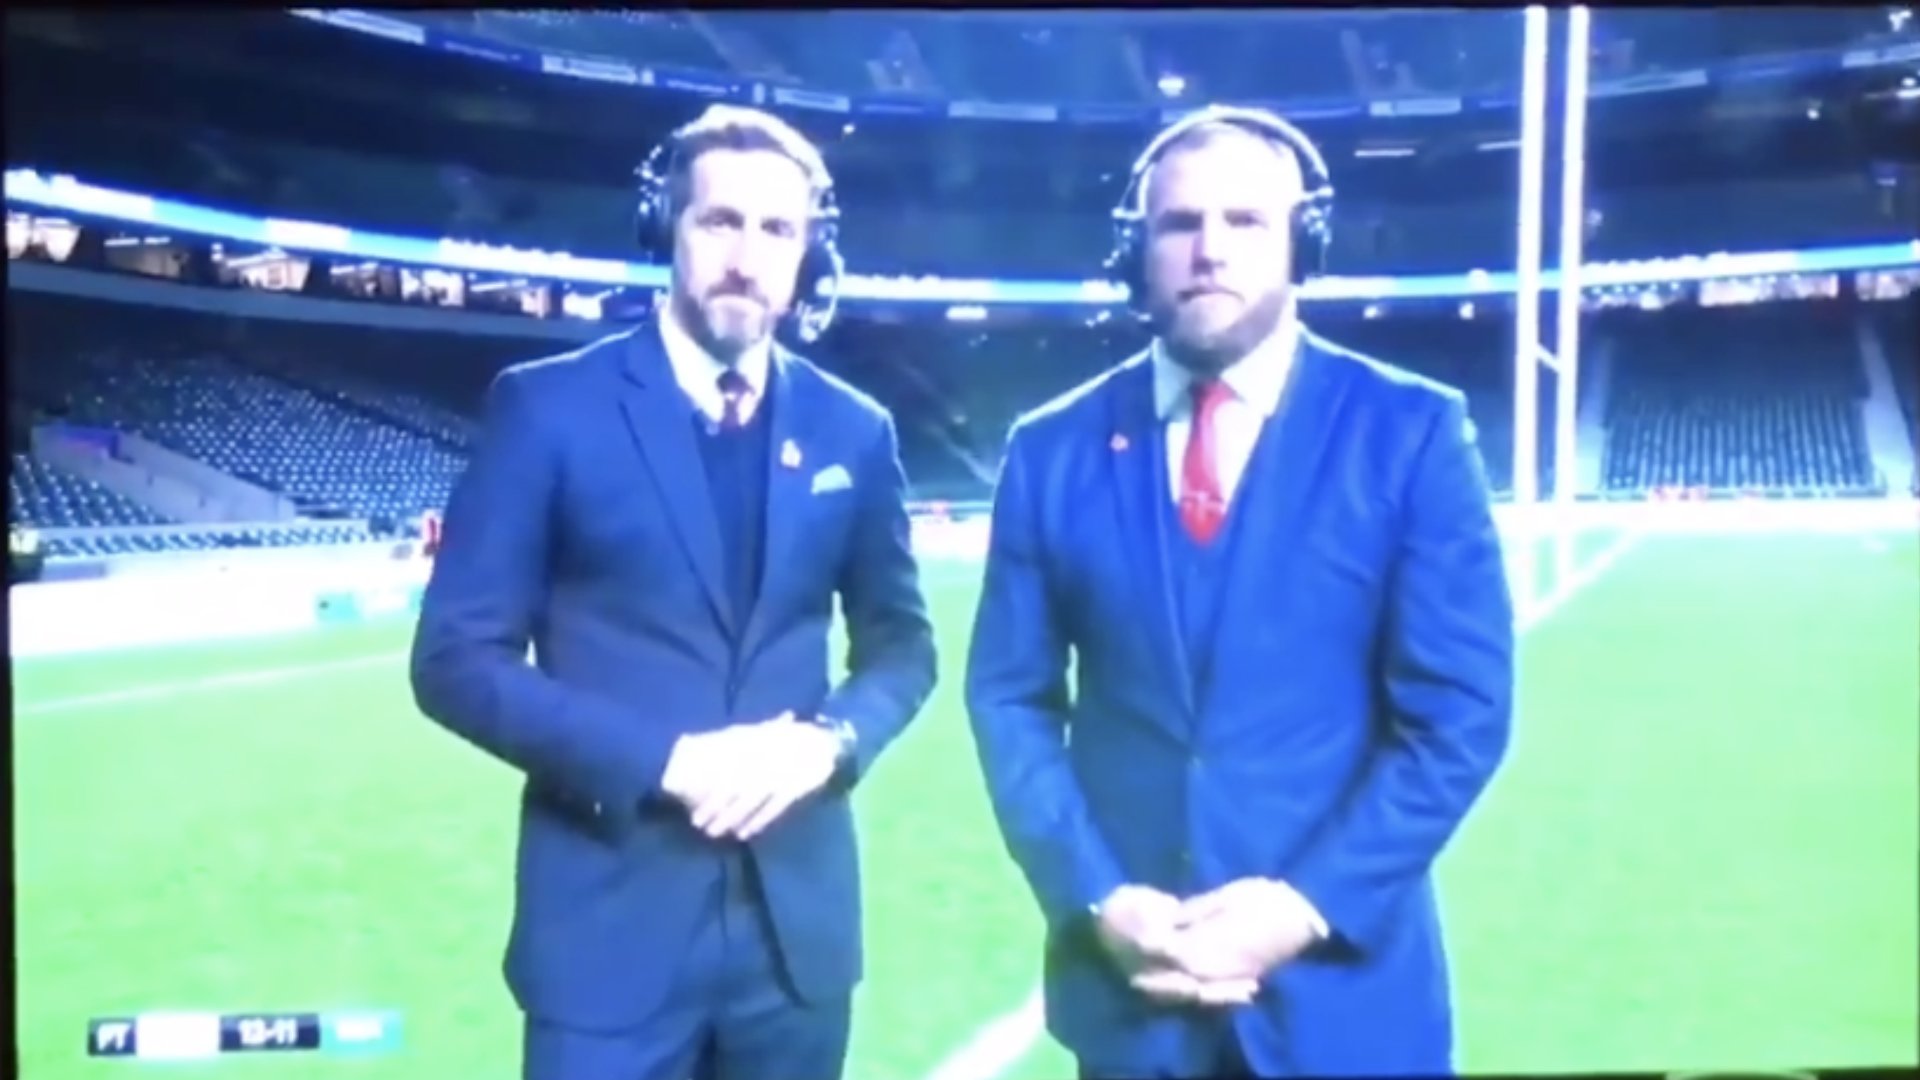 VIDEO: James Haskell appears to be drunk in post match analysis interview